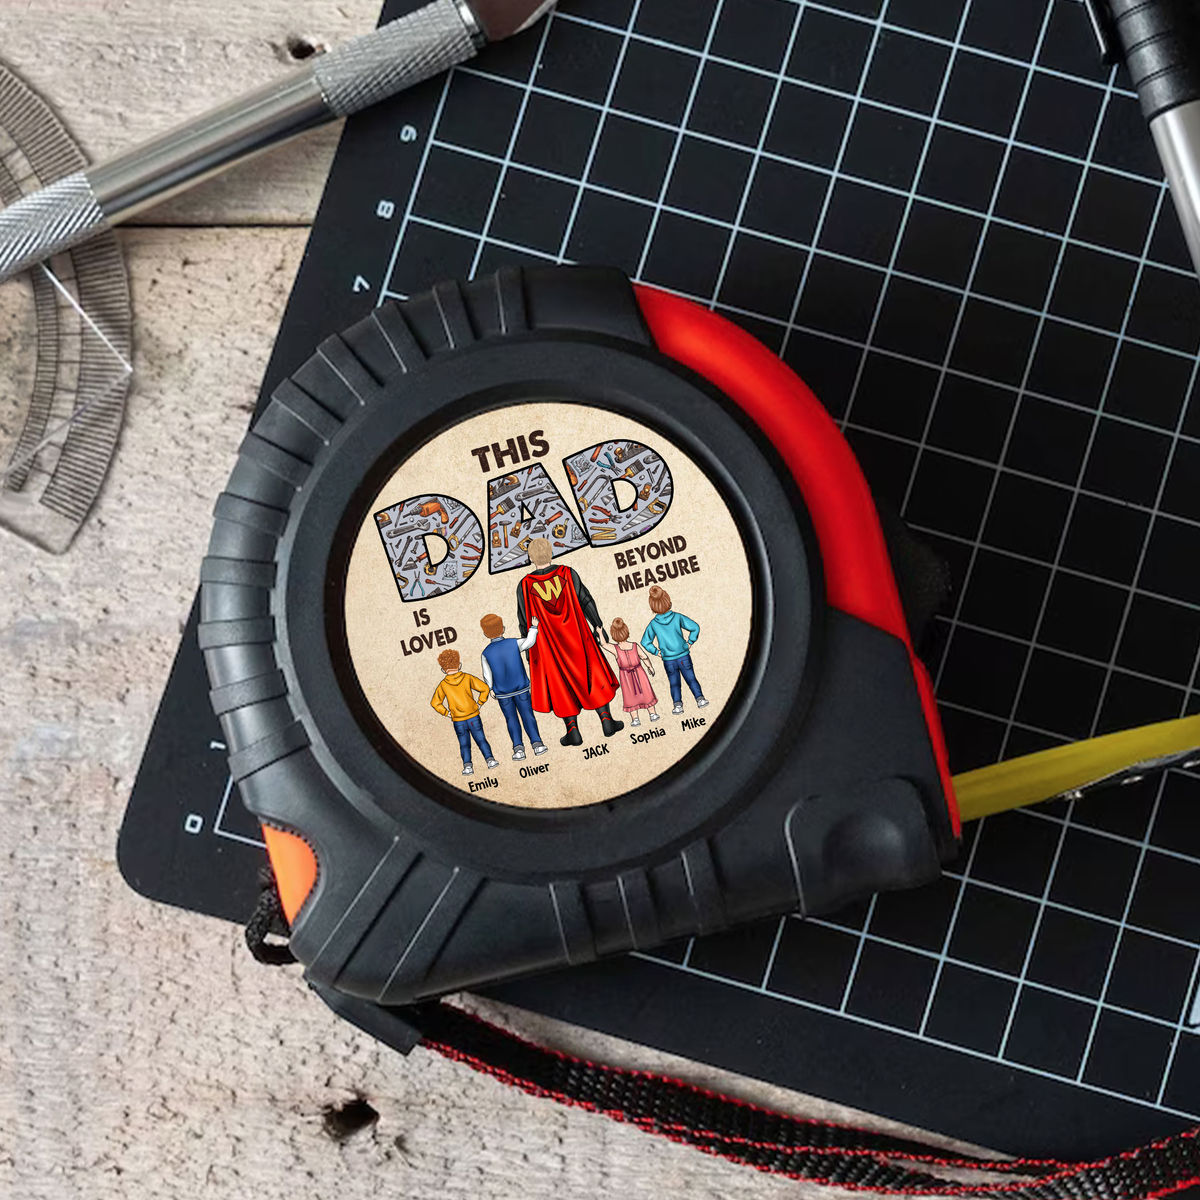 Personalized Tape Measure - This DAD is Loved Beyond Measure - Super Handyman_2